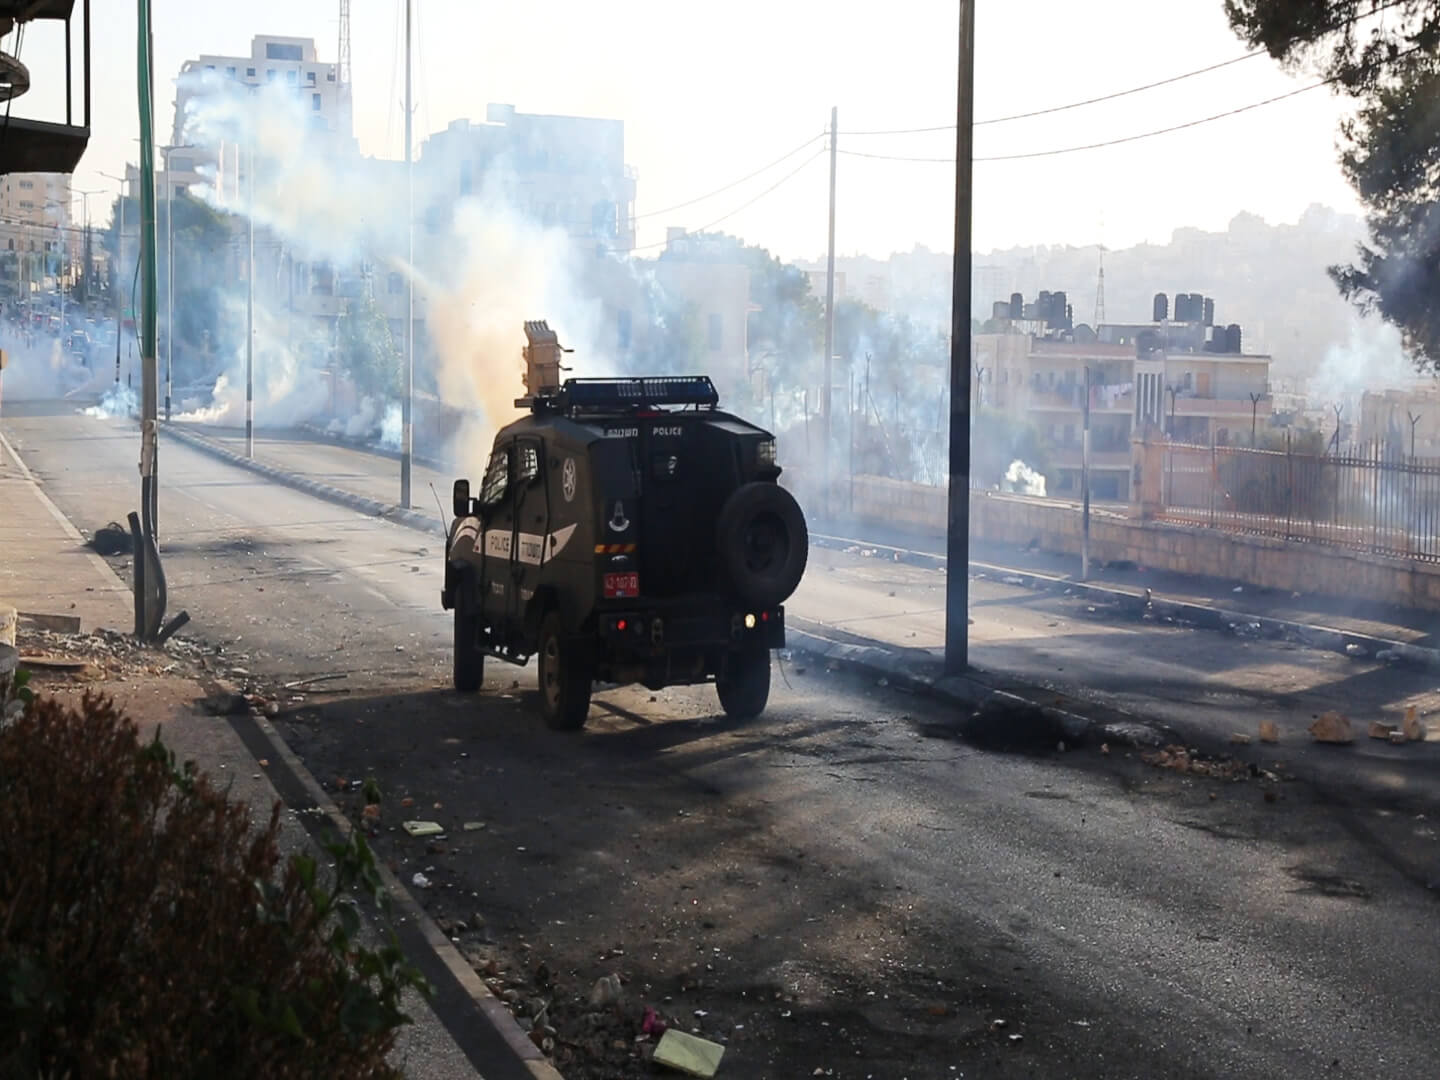 Israeli army jeeps have the capability of shooting off up to 60 tear gas canisters at once without reloading. (Photo: Abed al Qaisi)